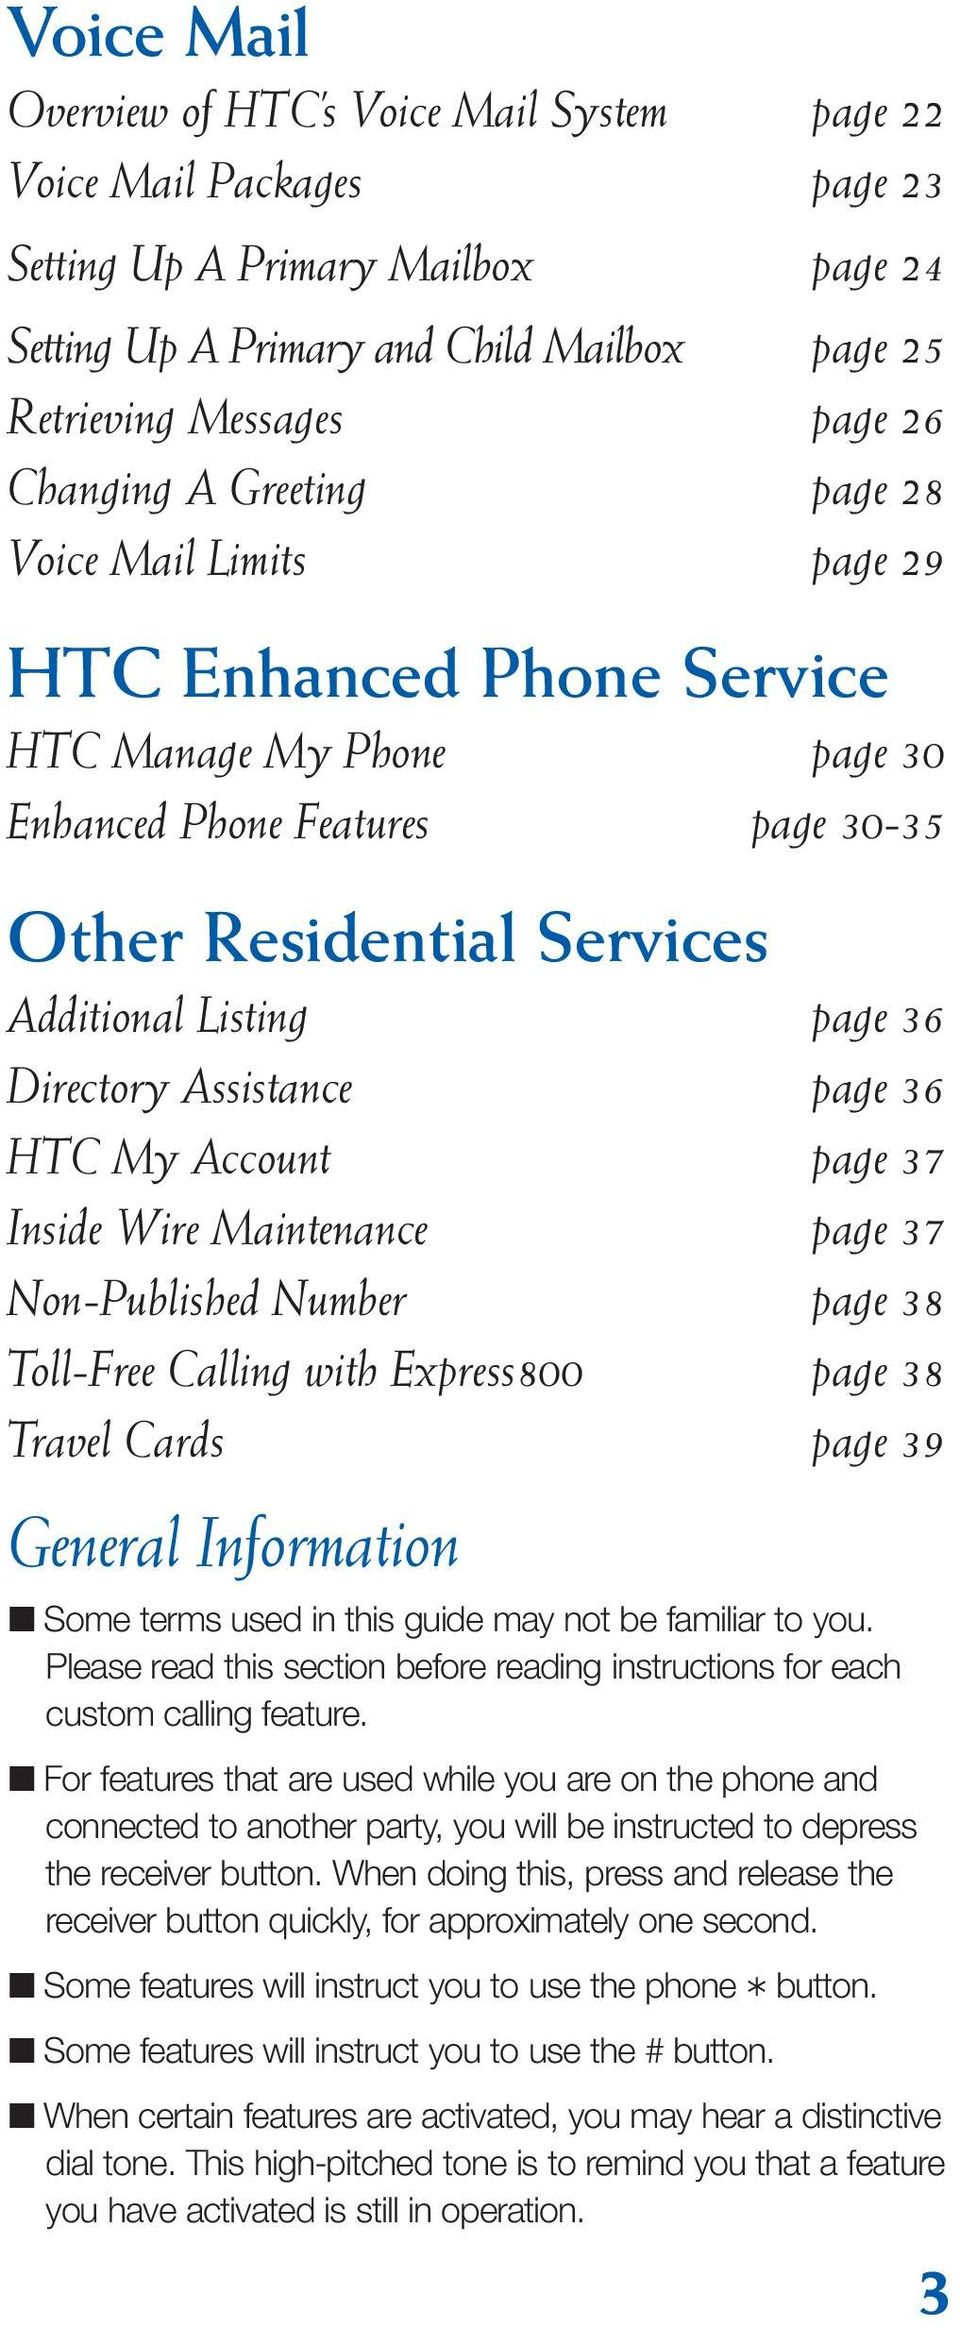 Directory Assistance page 36 HTC My Account page 37 Inside Wire Maintenance page 37 Non-Published Number page 38 Toll-Free Calling with Express800 page 38 Travel Cards page 39 General Information